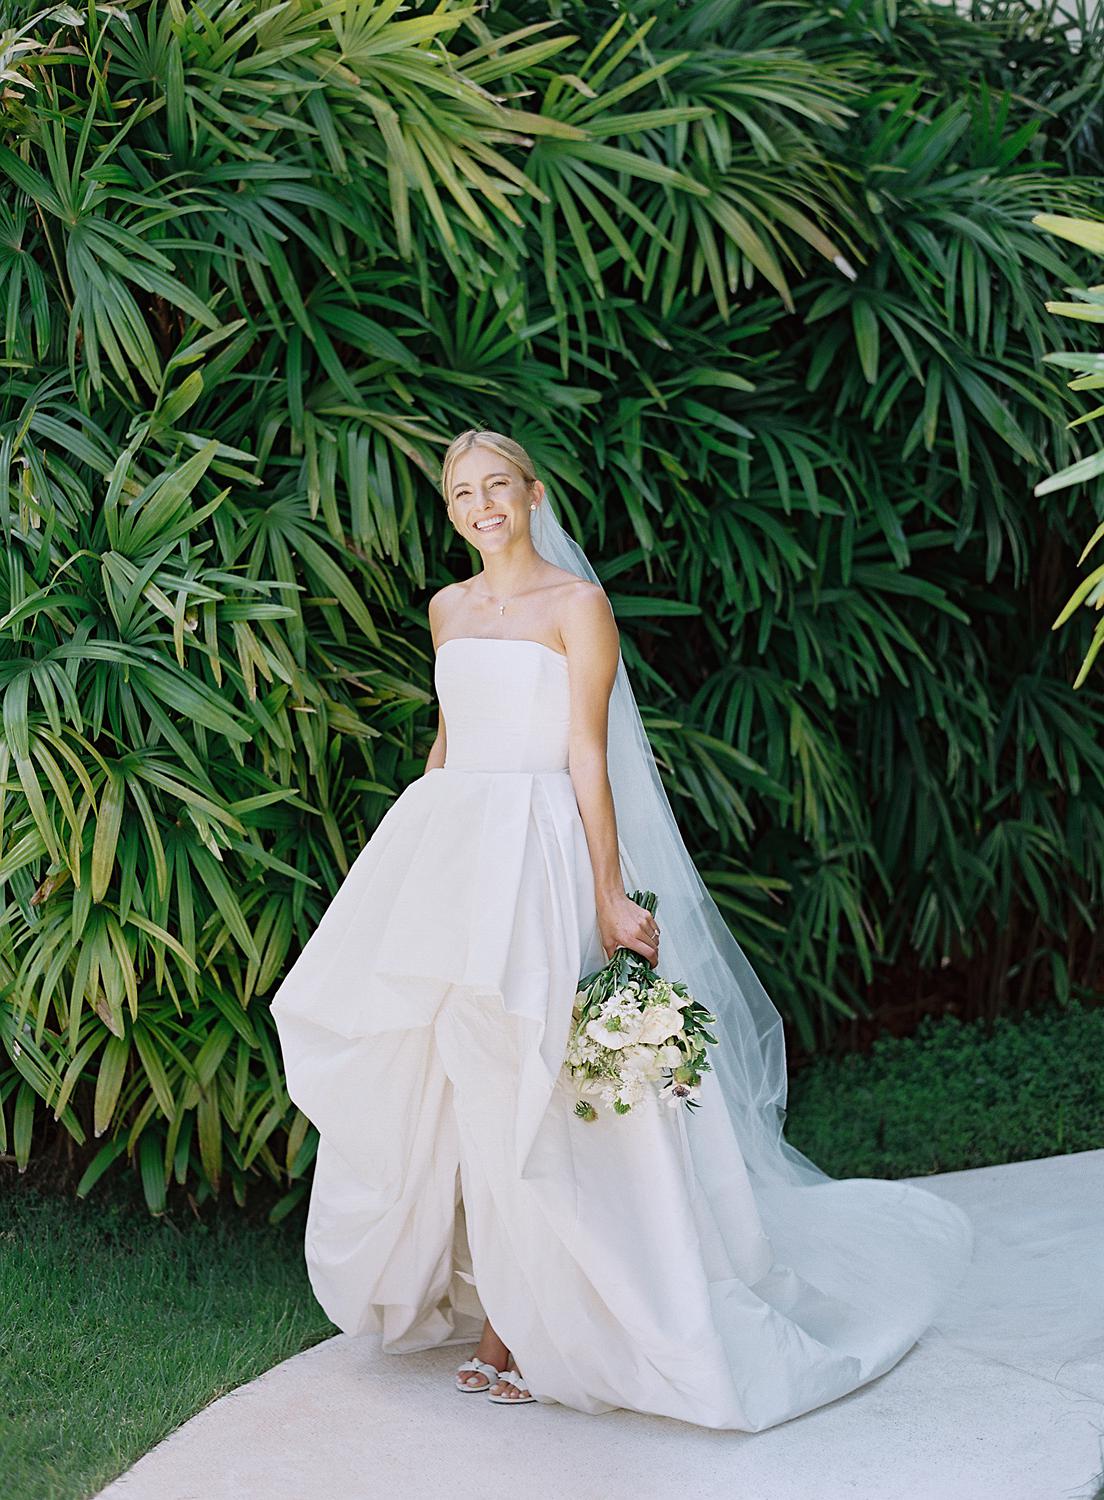 Portrait of bride against the lush greenery of The Dominican Republic.